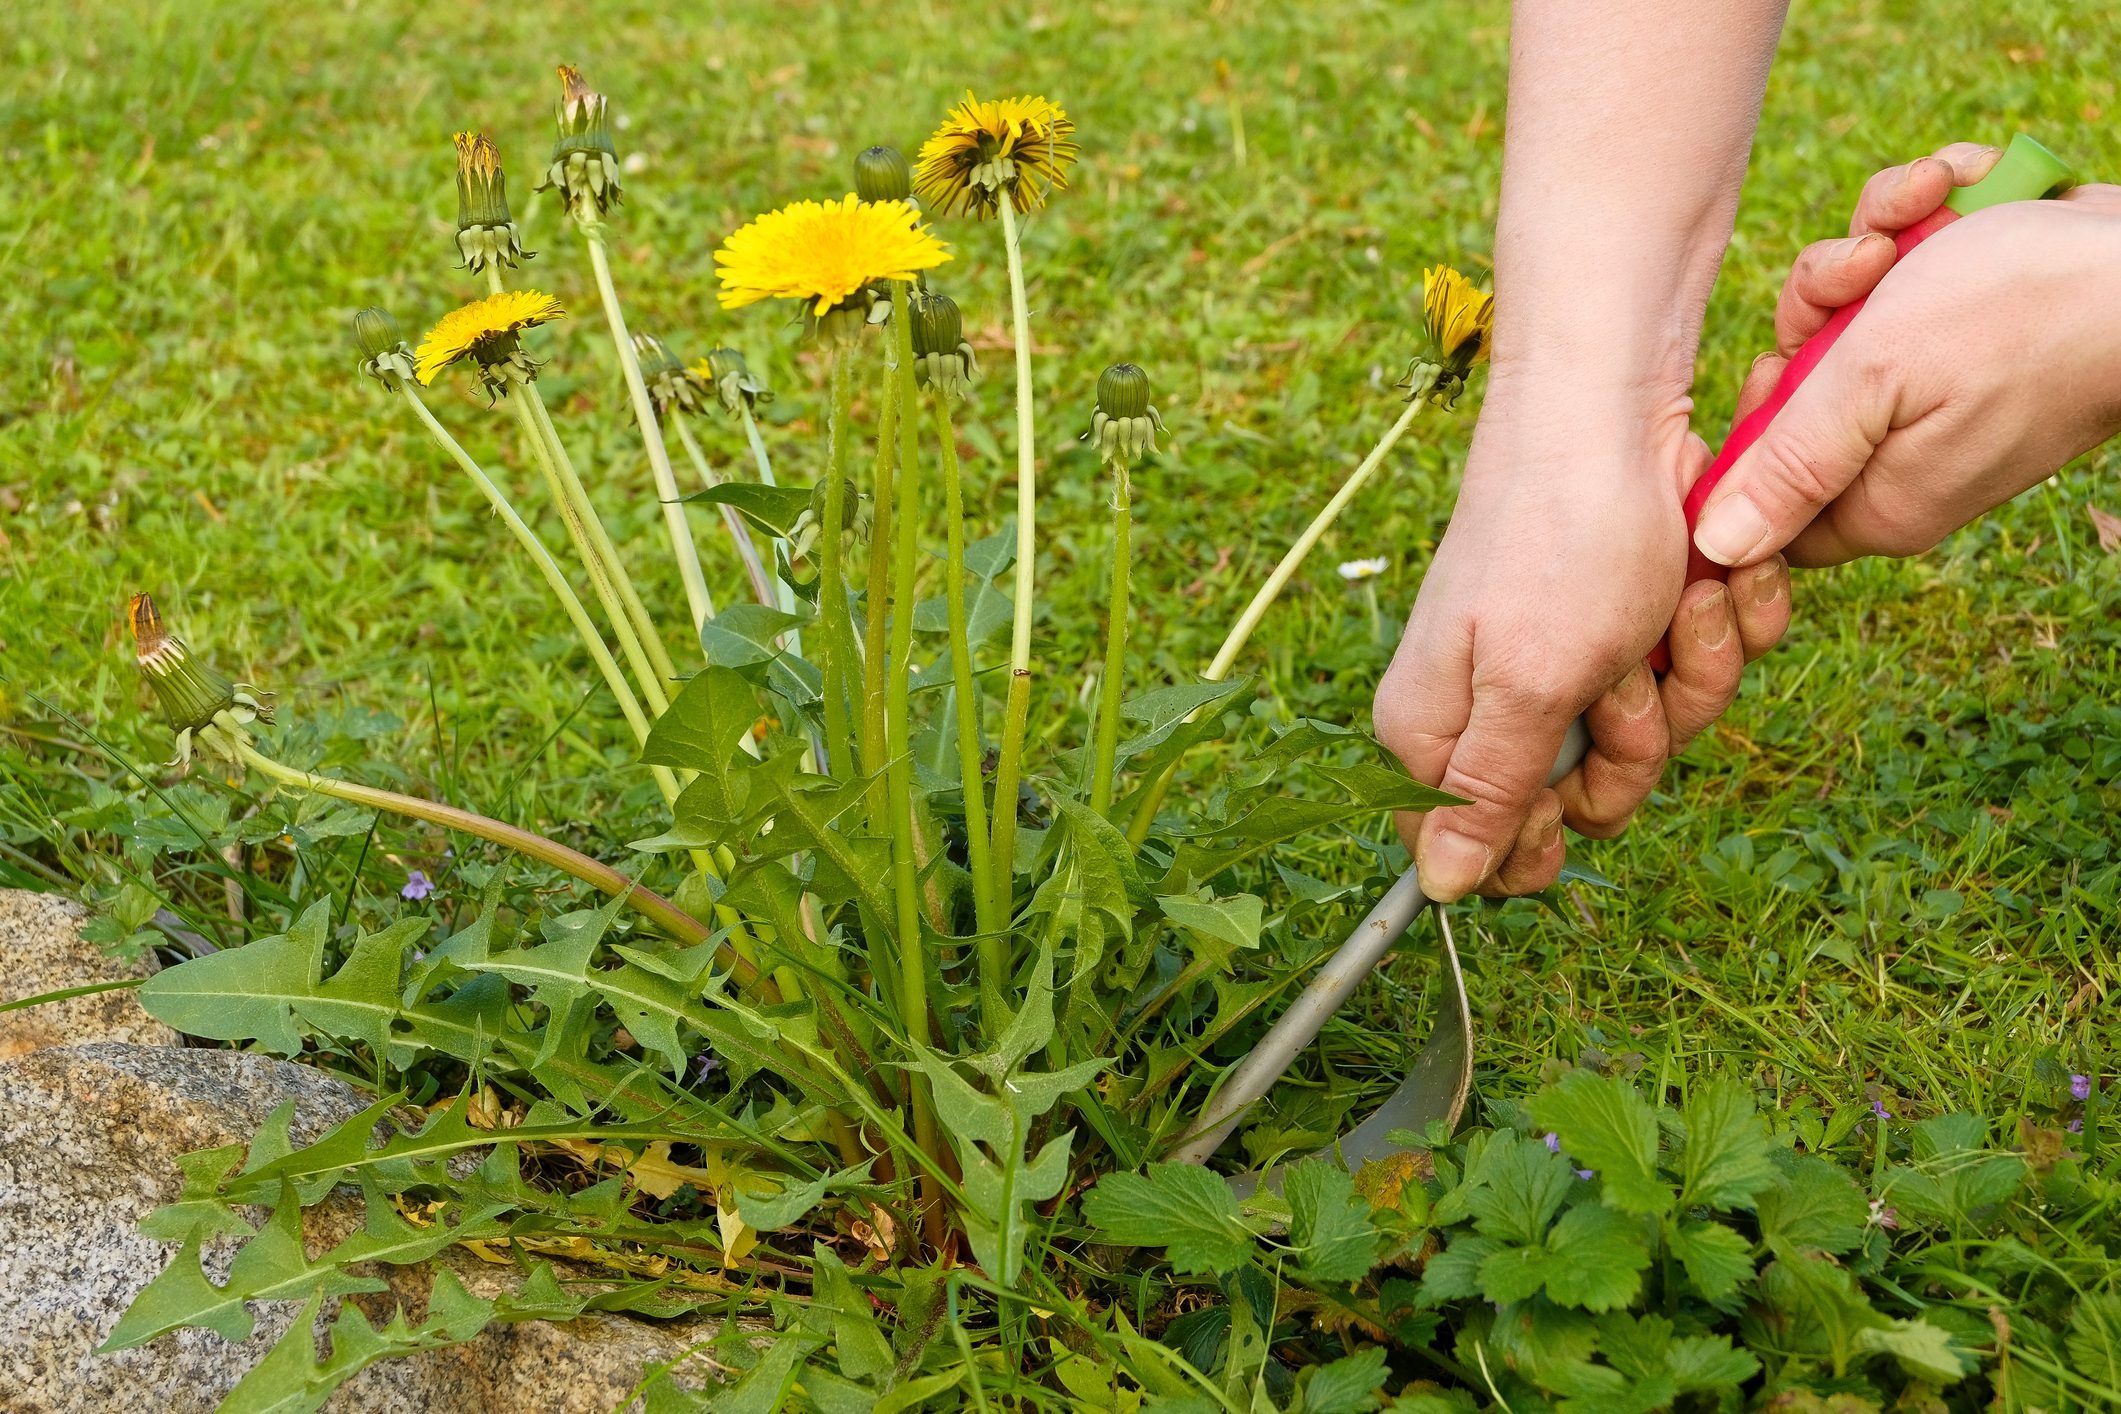 How To Get Rid of Dandelions in Your Lawn